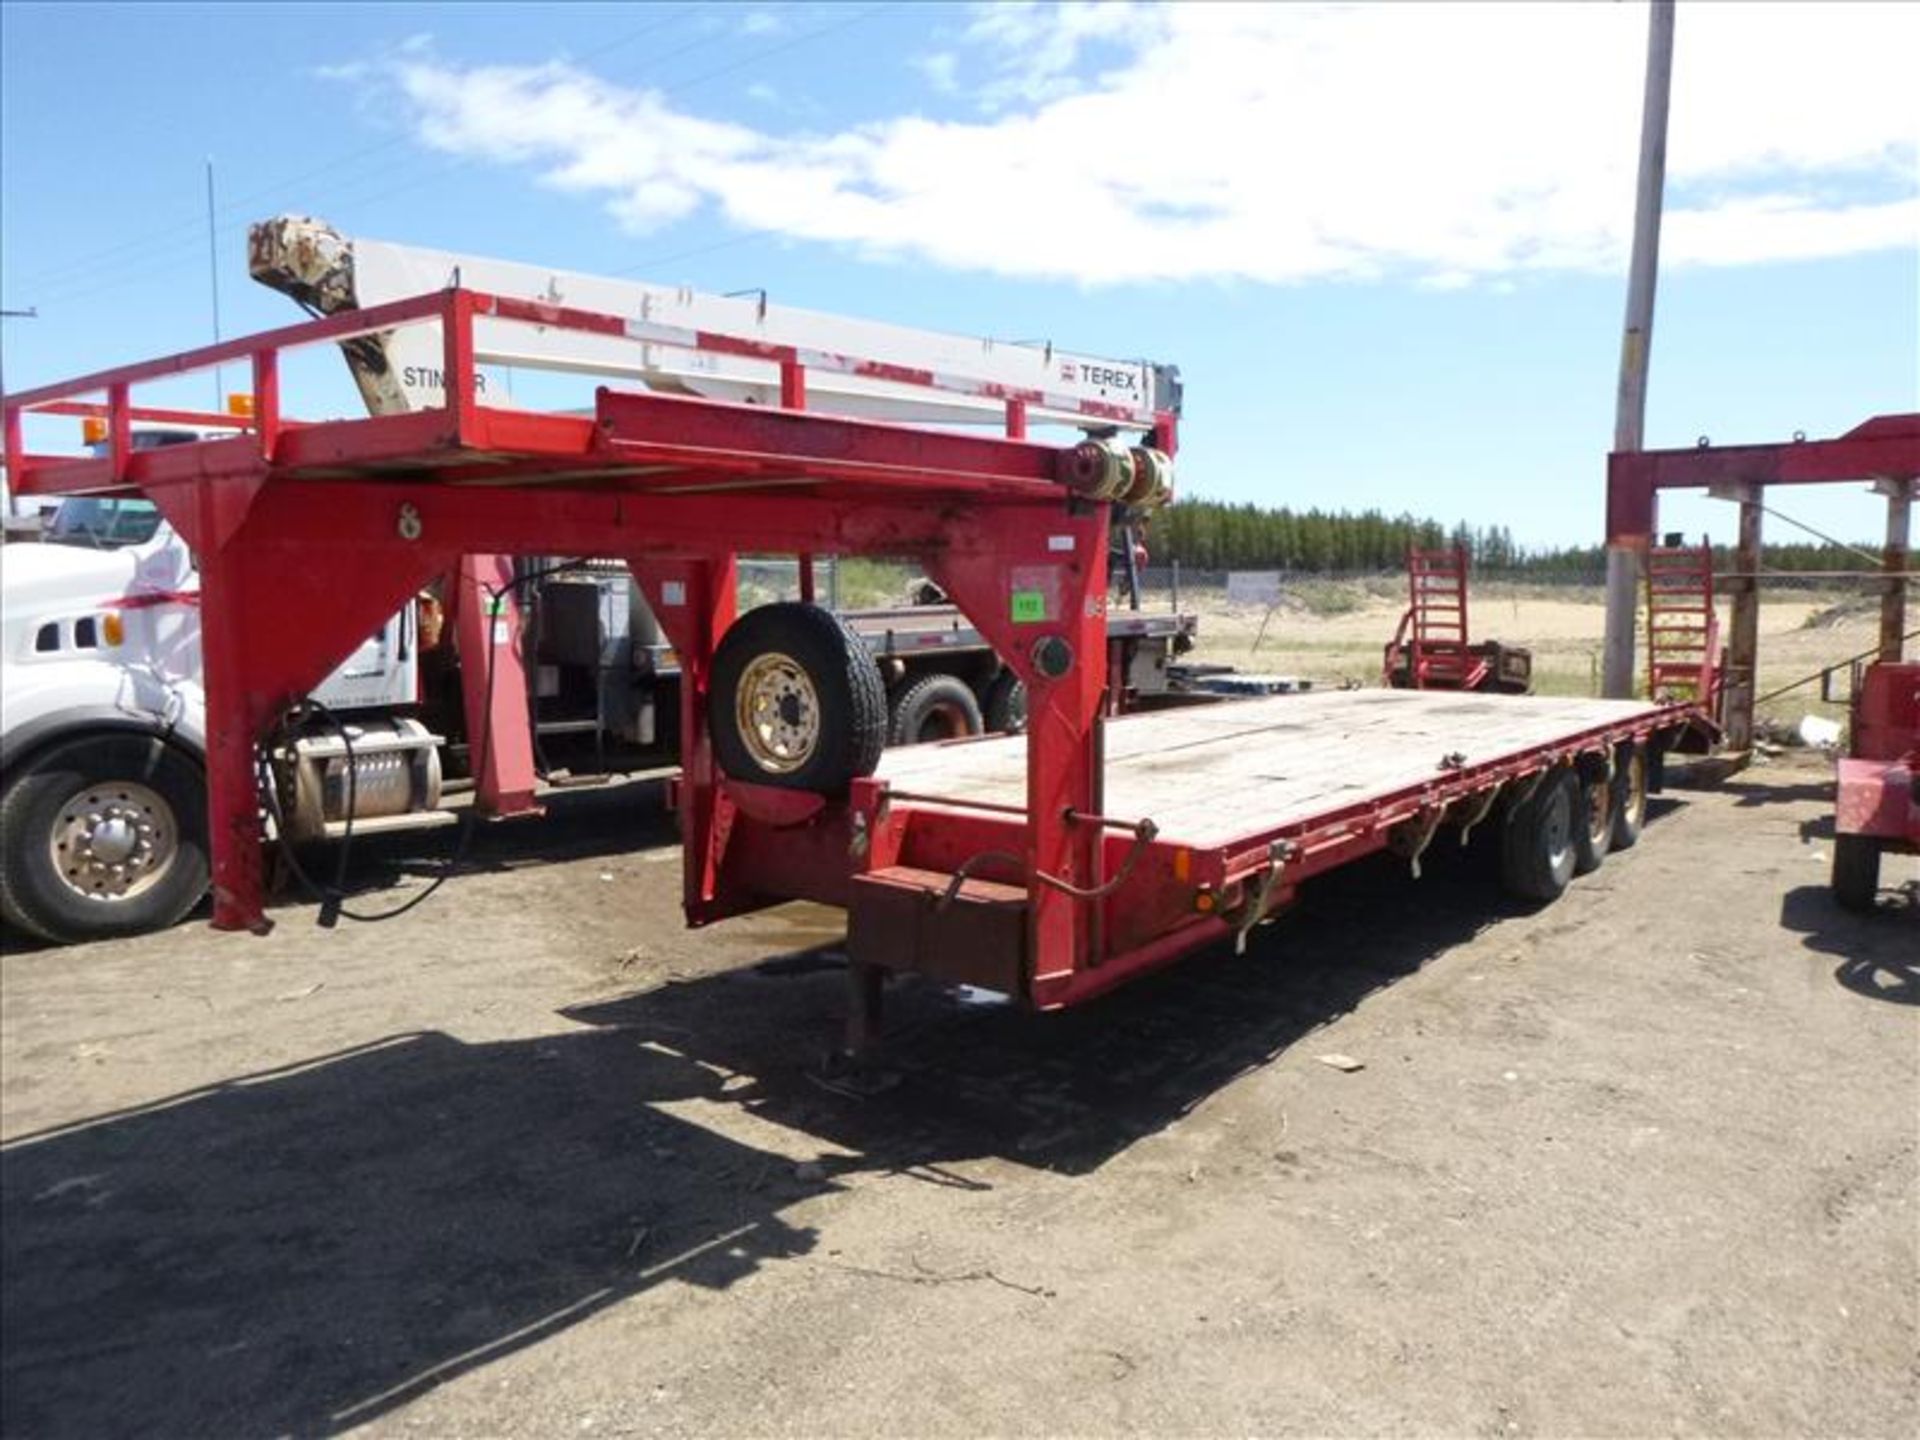 Laroche goose neck trailer, VIN 2F9M3G05XS069221, 25 ft. x 8 ft., 21000 lbs. cap. (located at 164